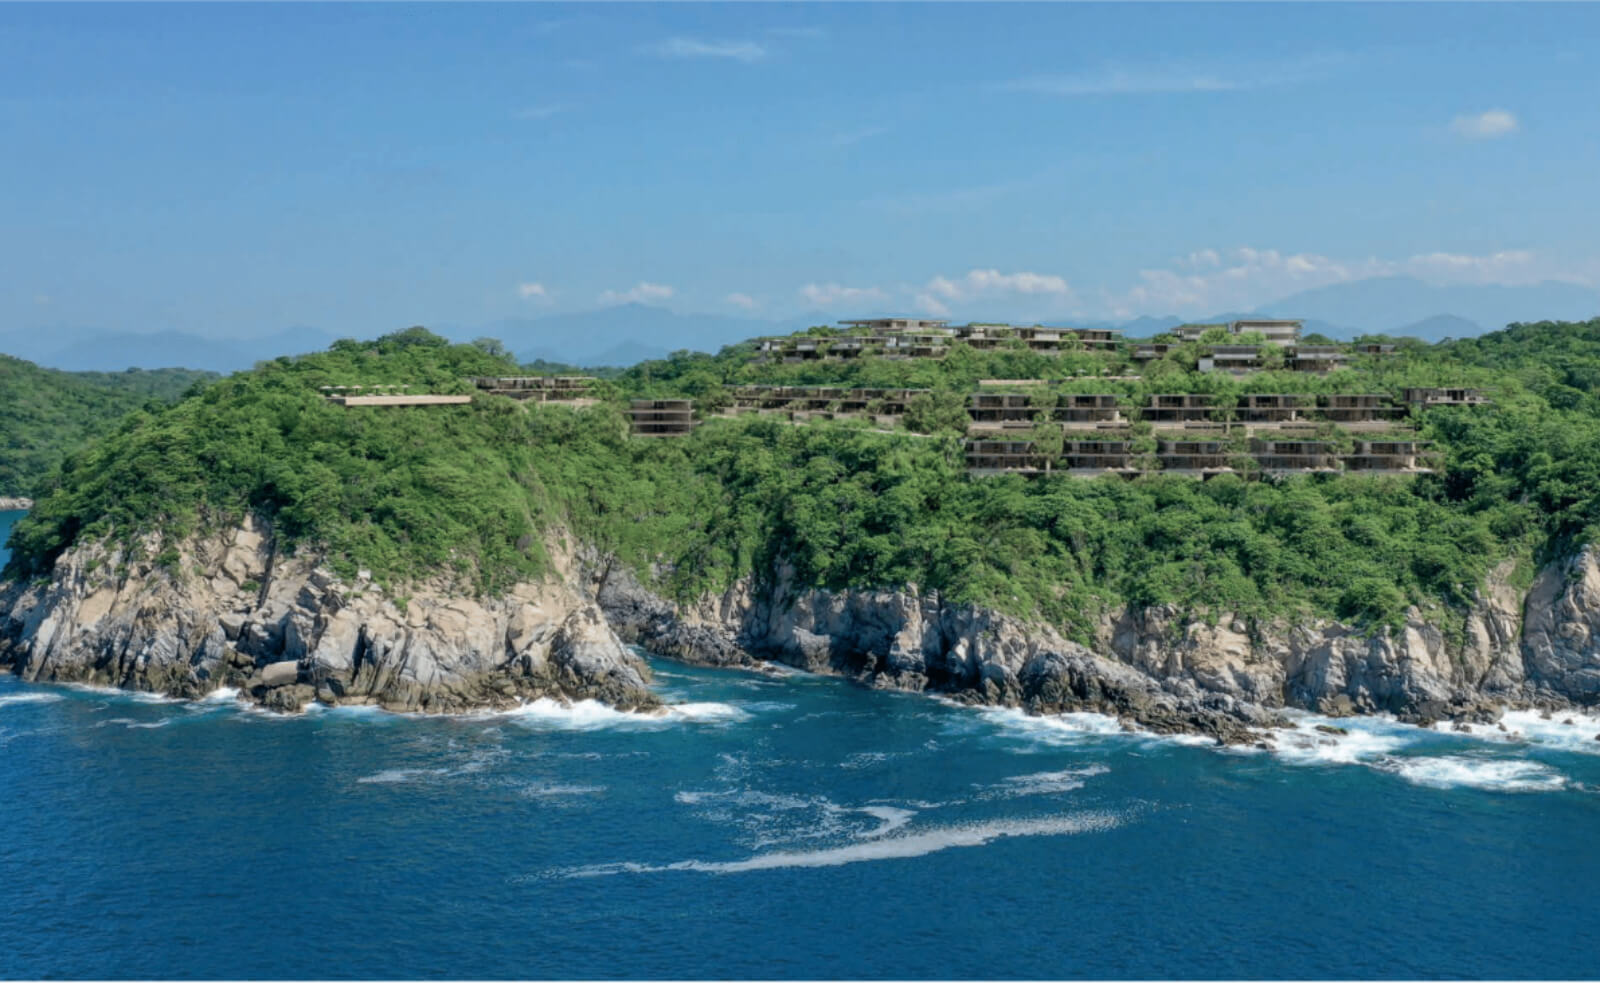 Villa with pool, ocean view, eco-friendly, furnished, for sale Huatulco.